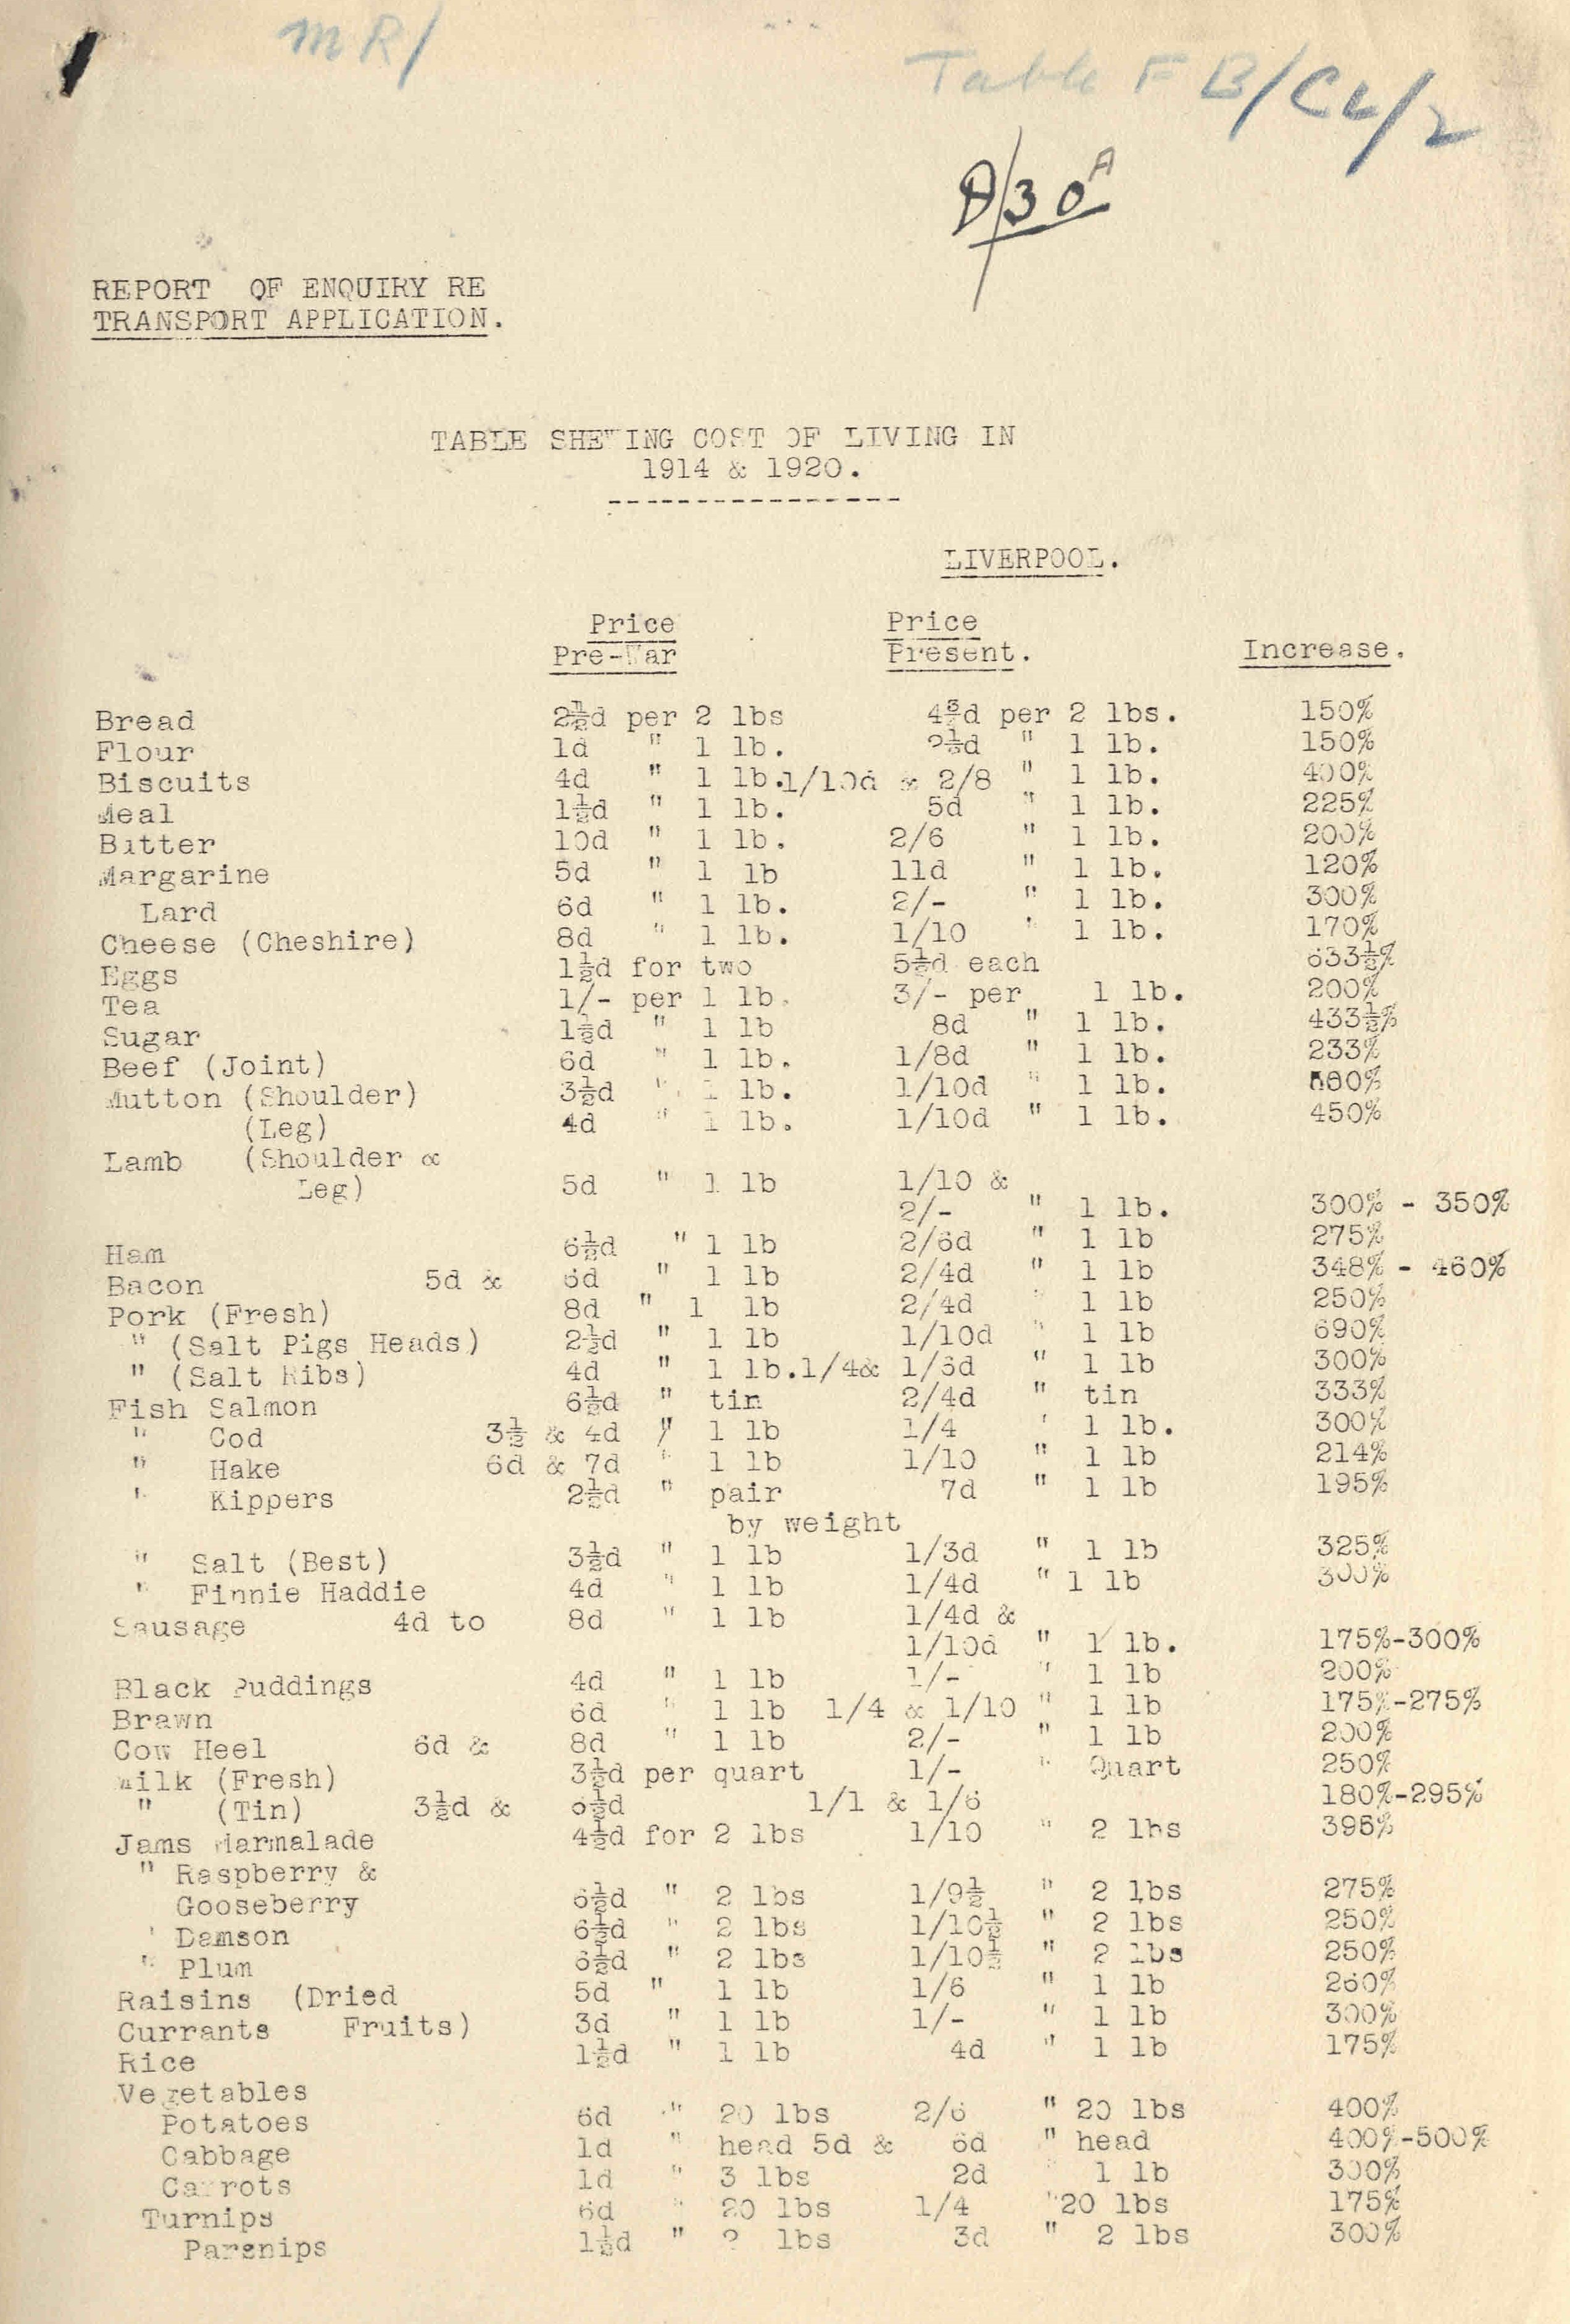 Liverpool: cost of living, 1914 and 1920